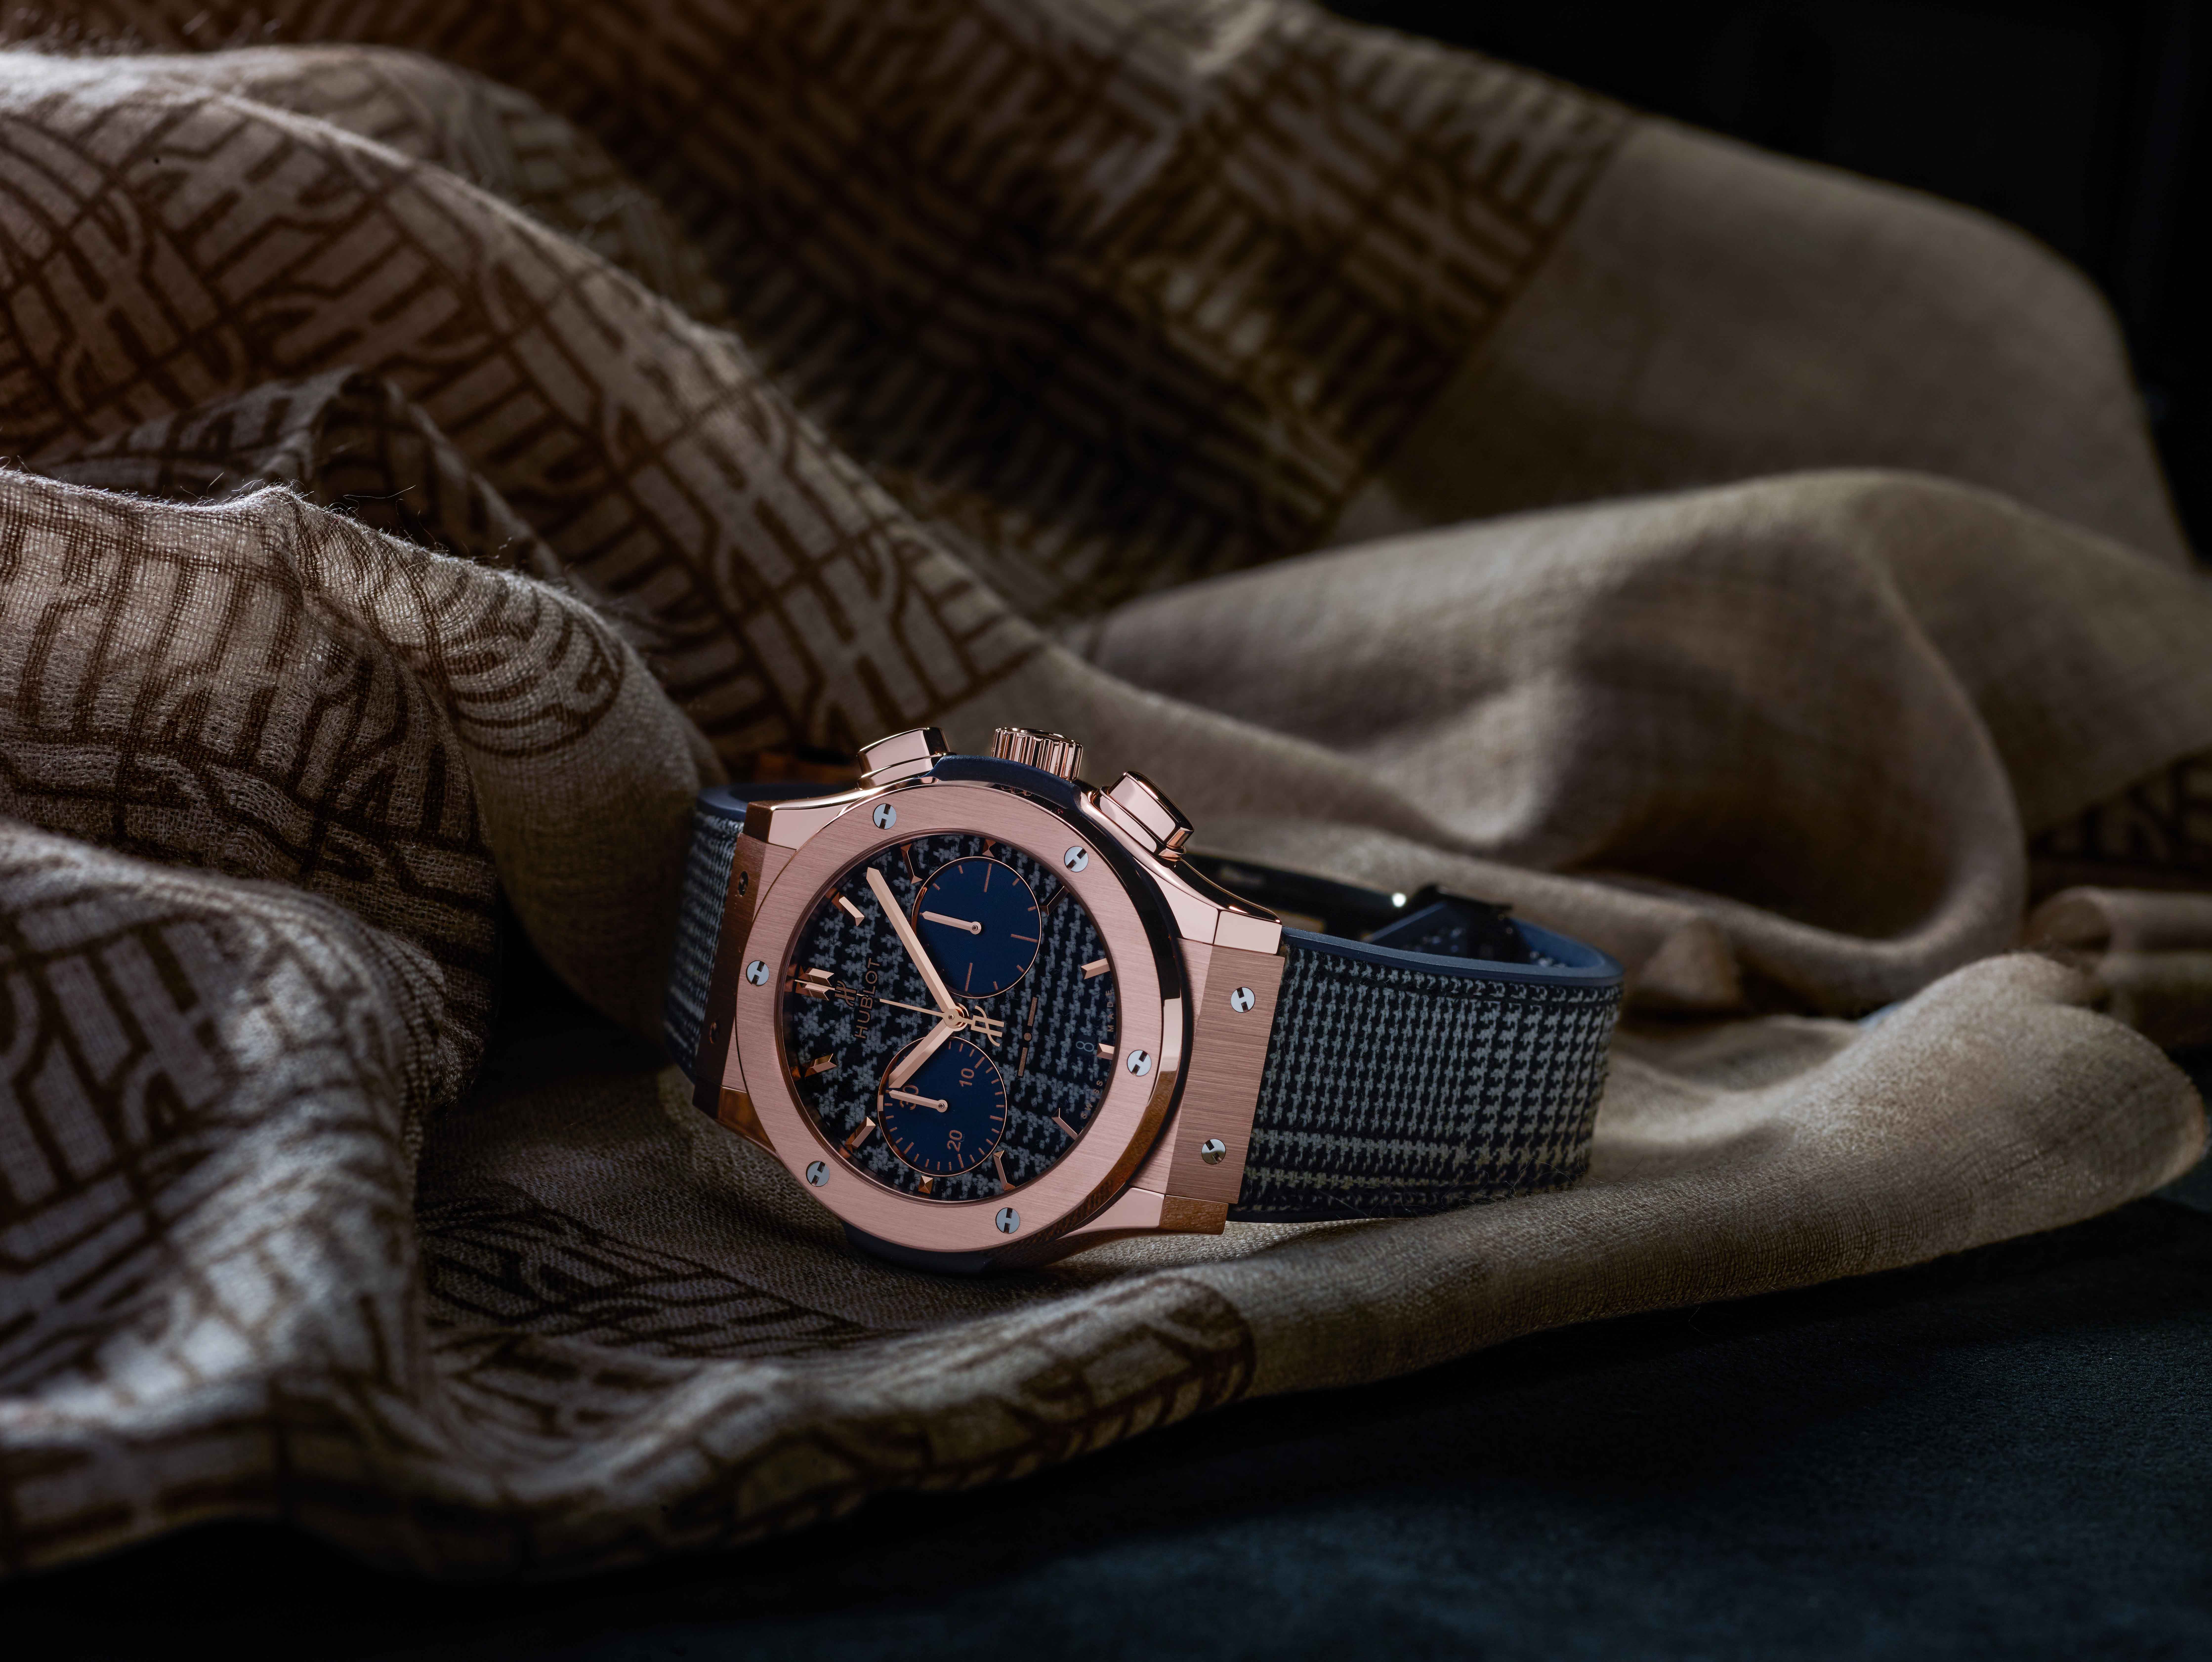 HUBLOT PRE-BASELWORLD COLLECTION Lifestyle